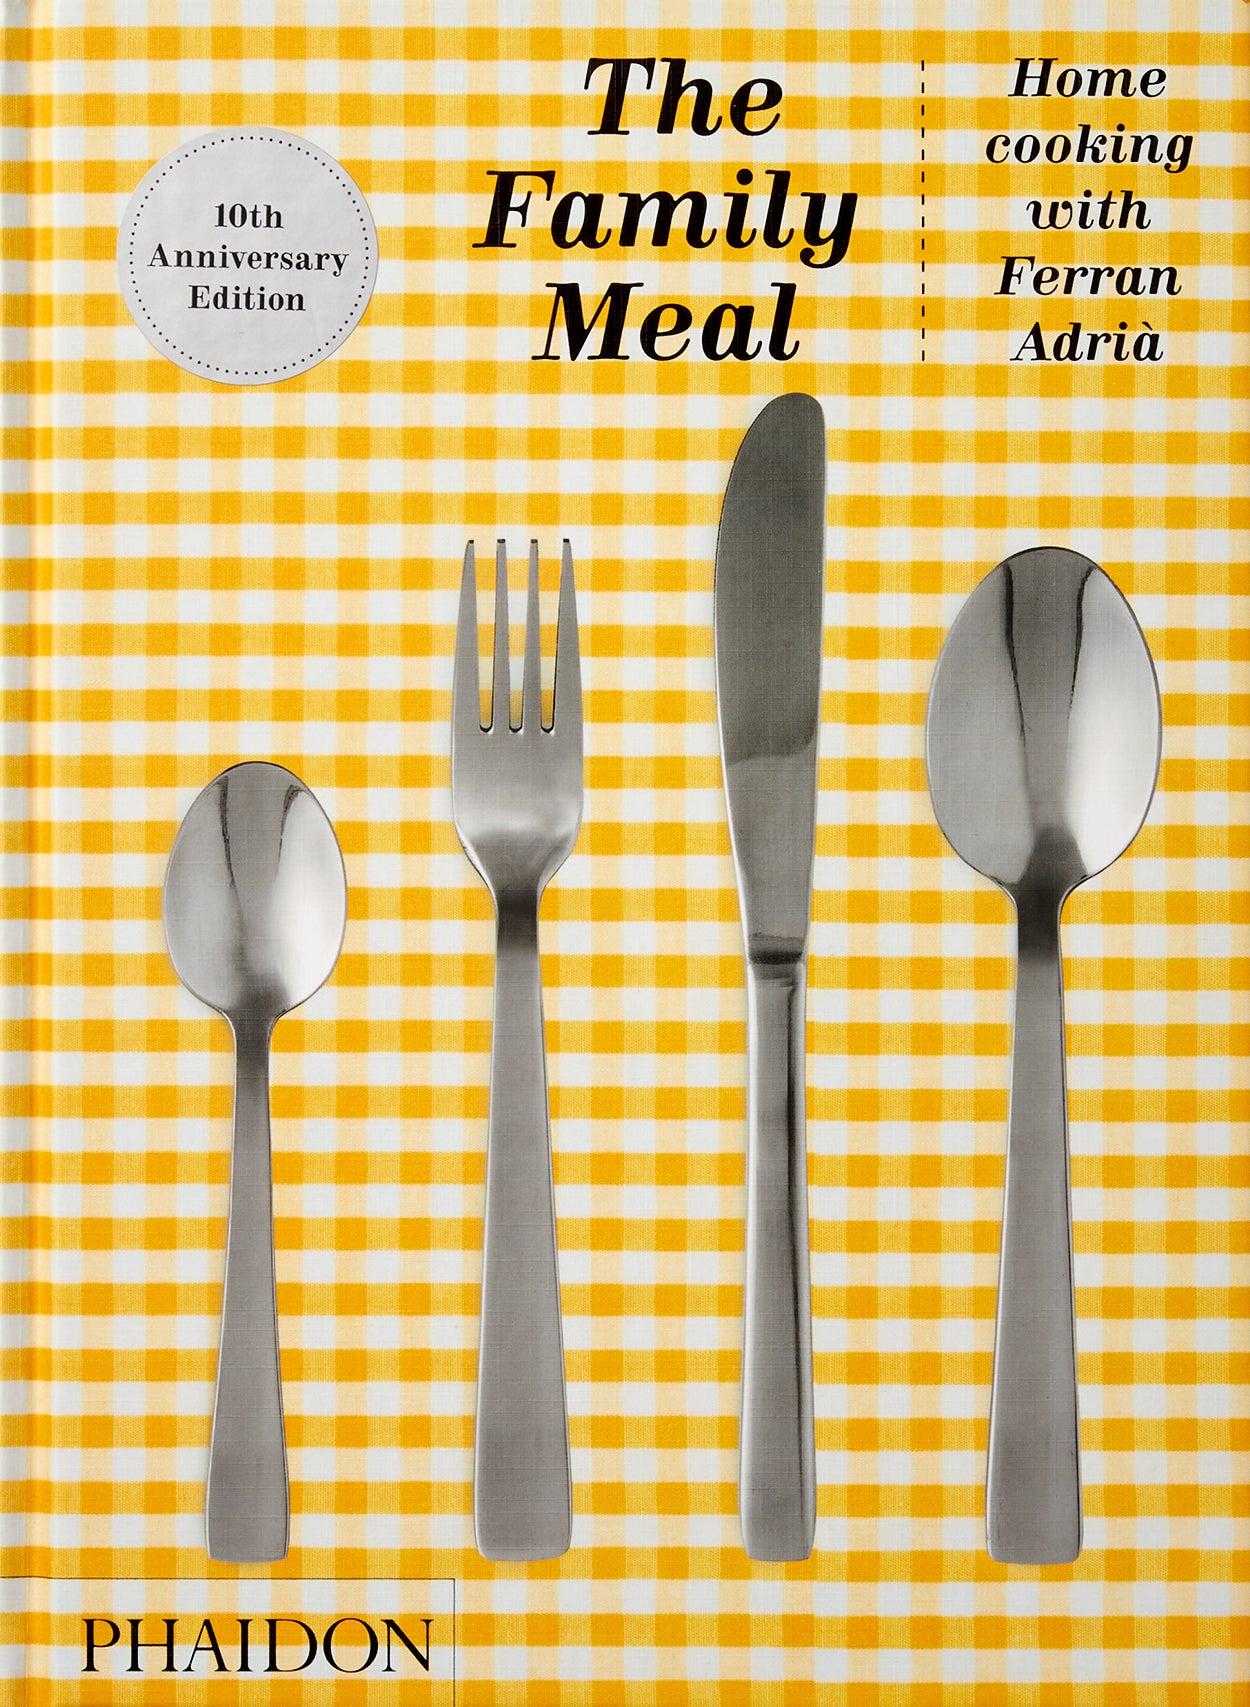 The Family Meal -  Home Cooking with Ferran Adrià, 10th Anniversary Edition